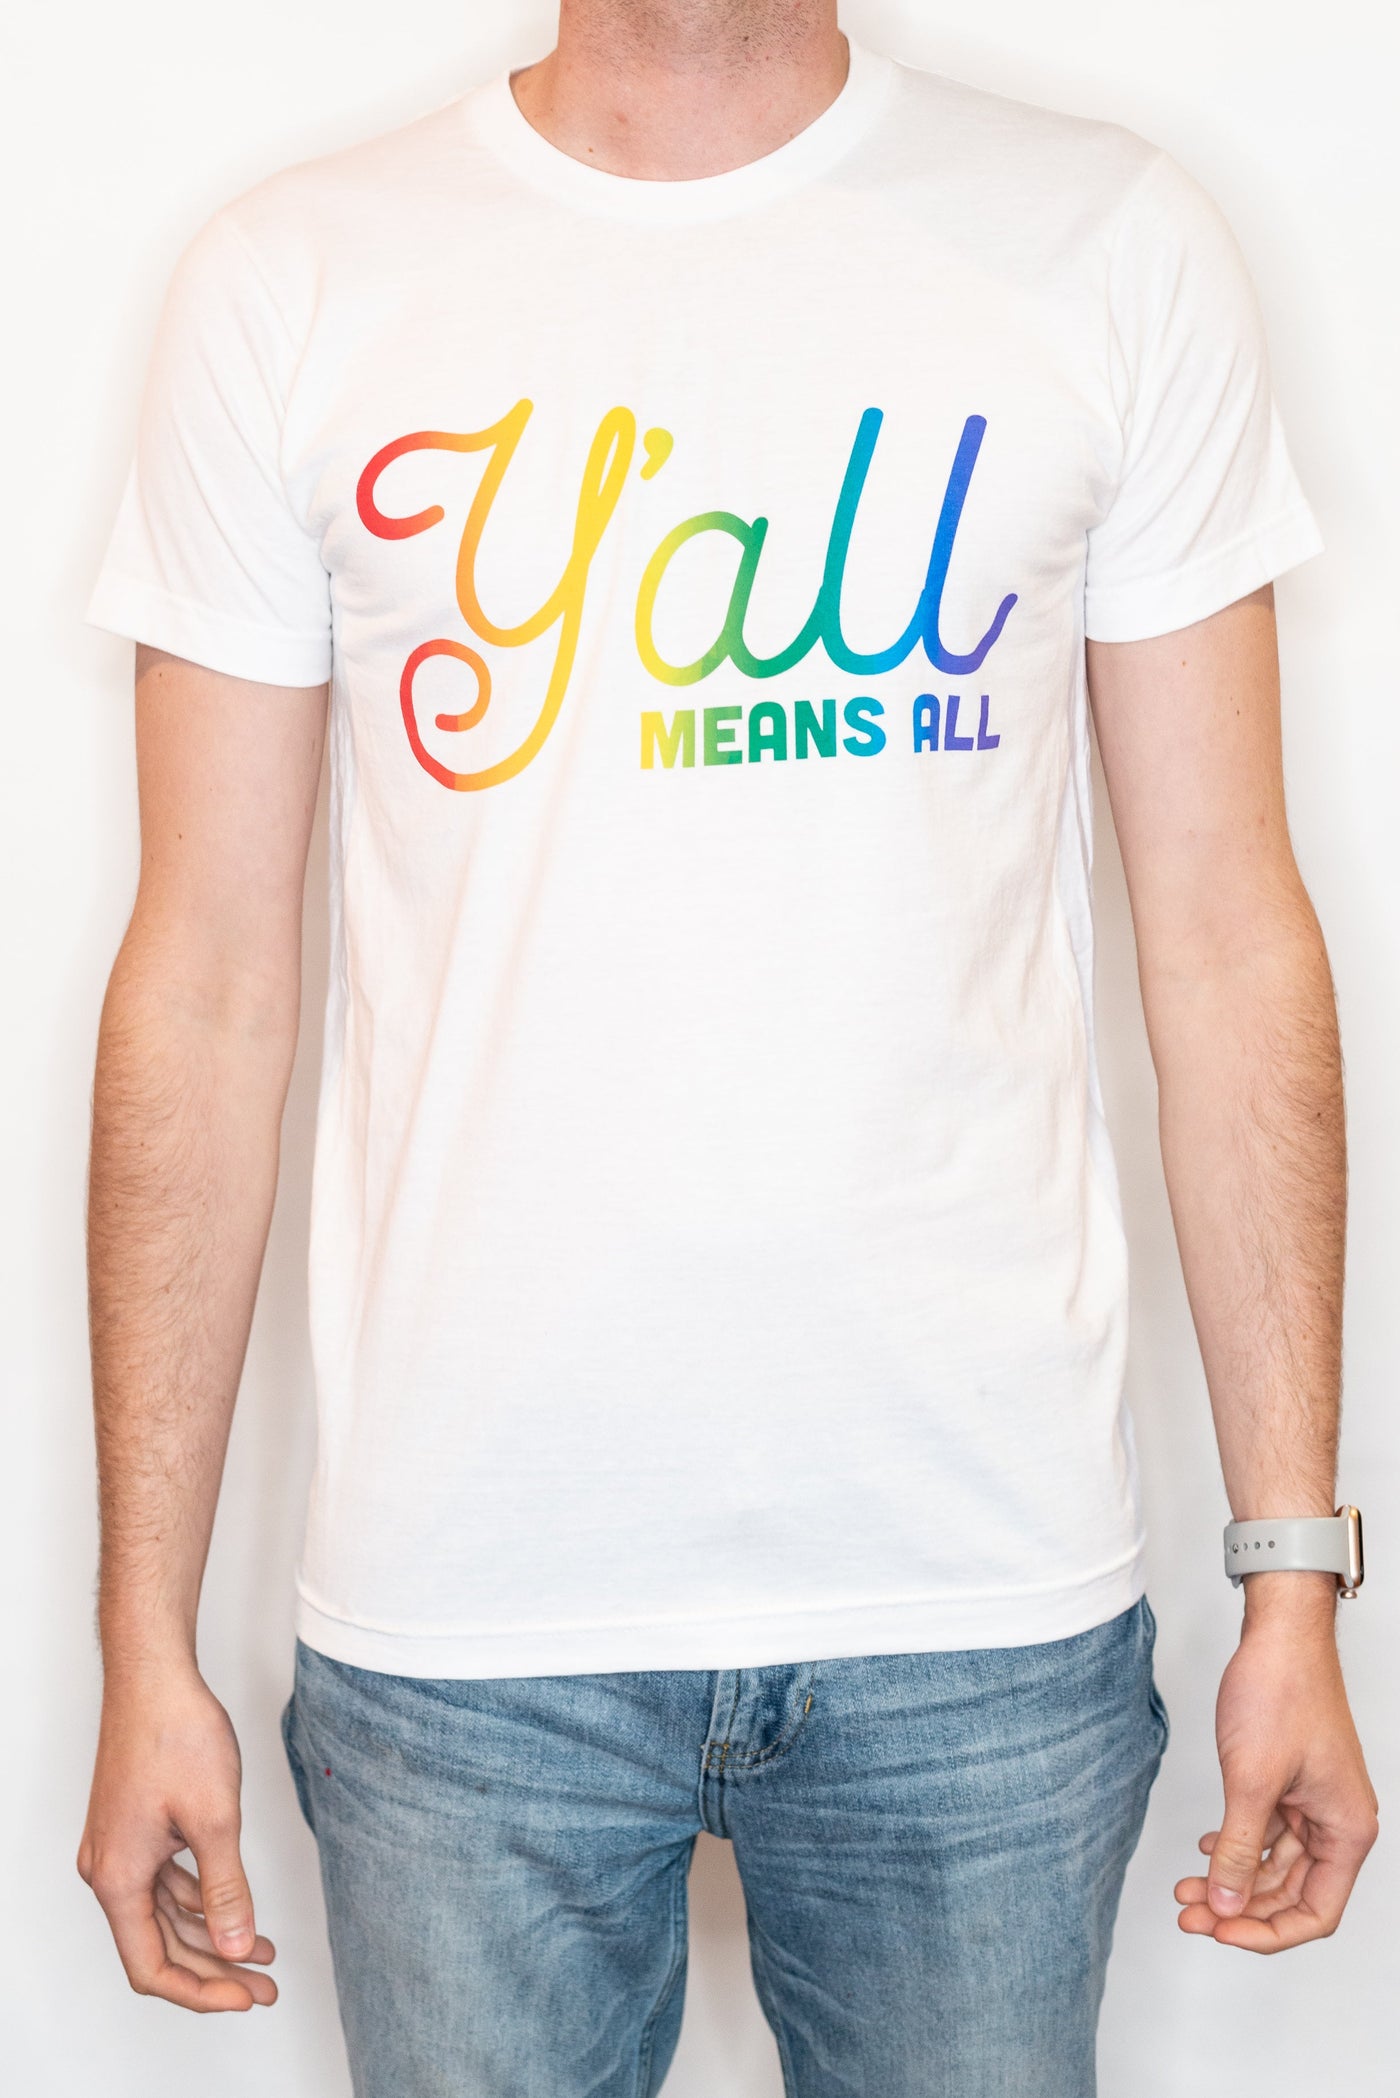 Yall Means All Tee - Pride Edition by Music City Creative